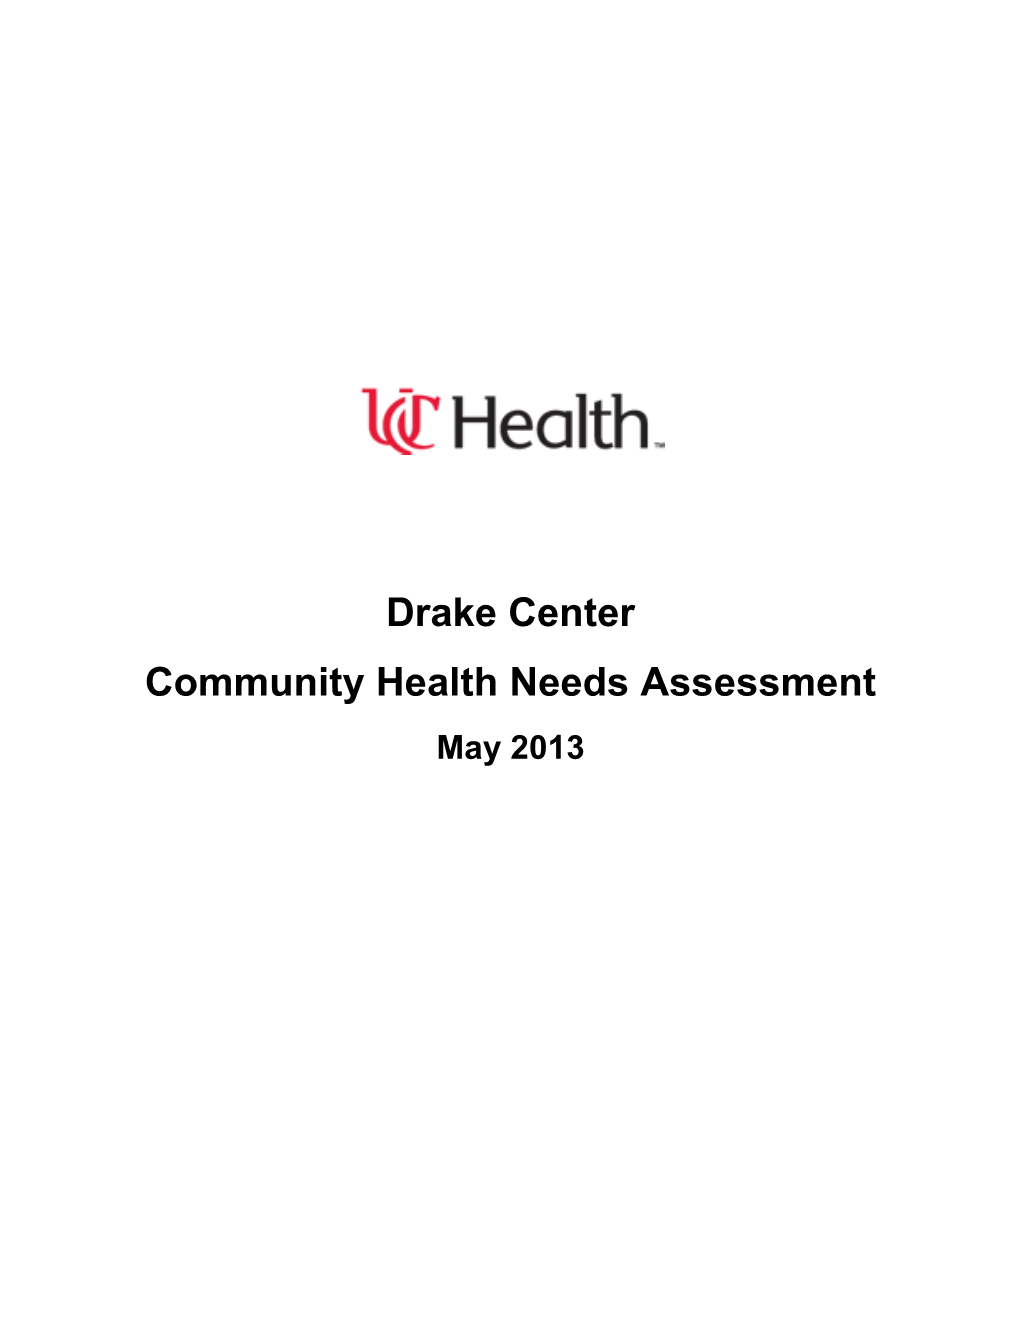 Drake Center Community Health Needs Assessment May 2013 Table of Contents